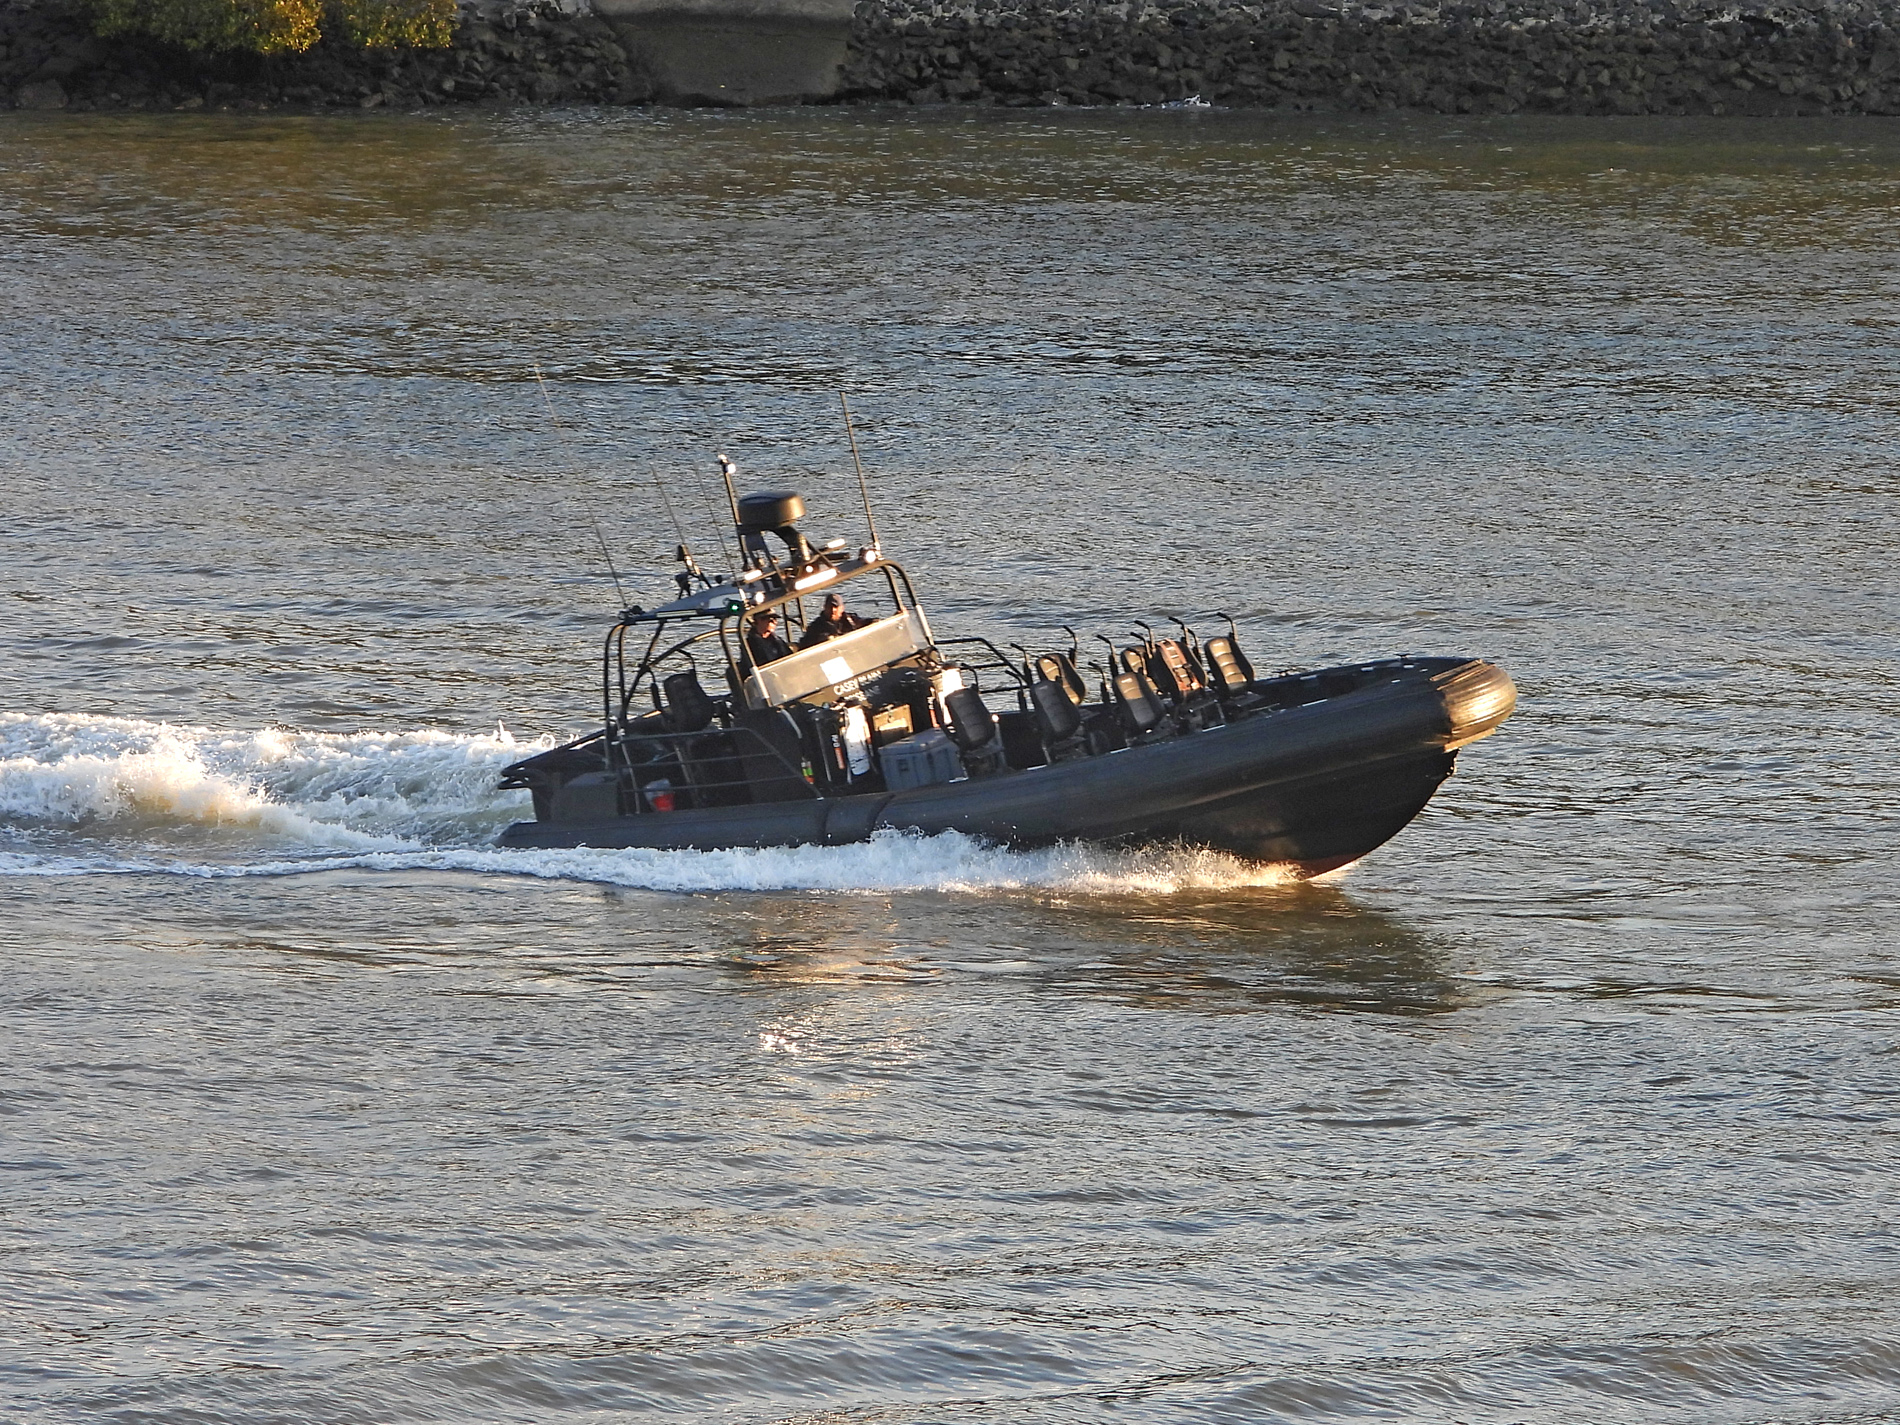 “River Fire Police” ~ 25 Sept 2021